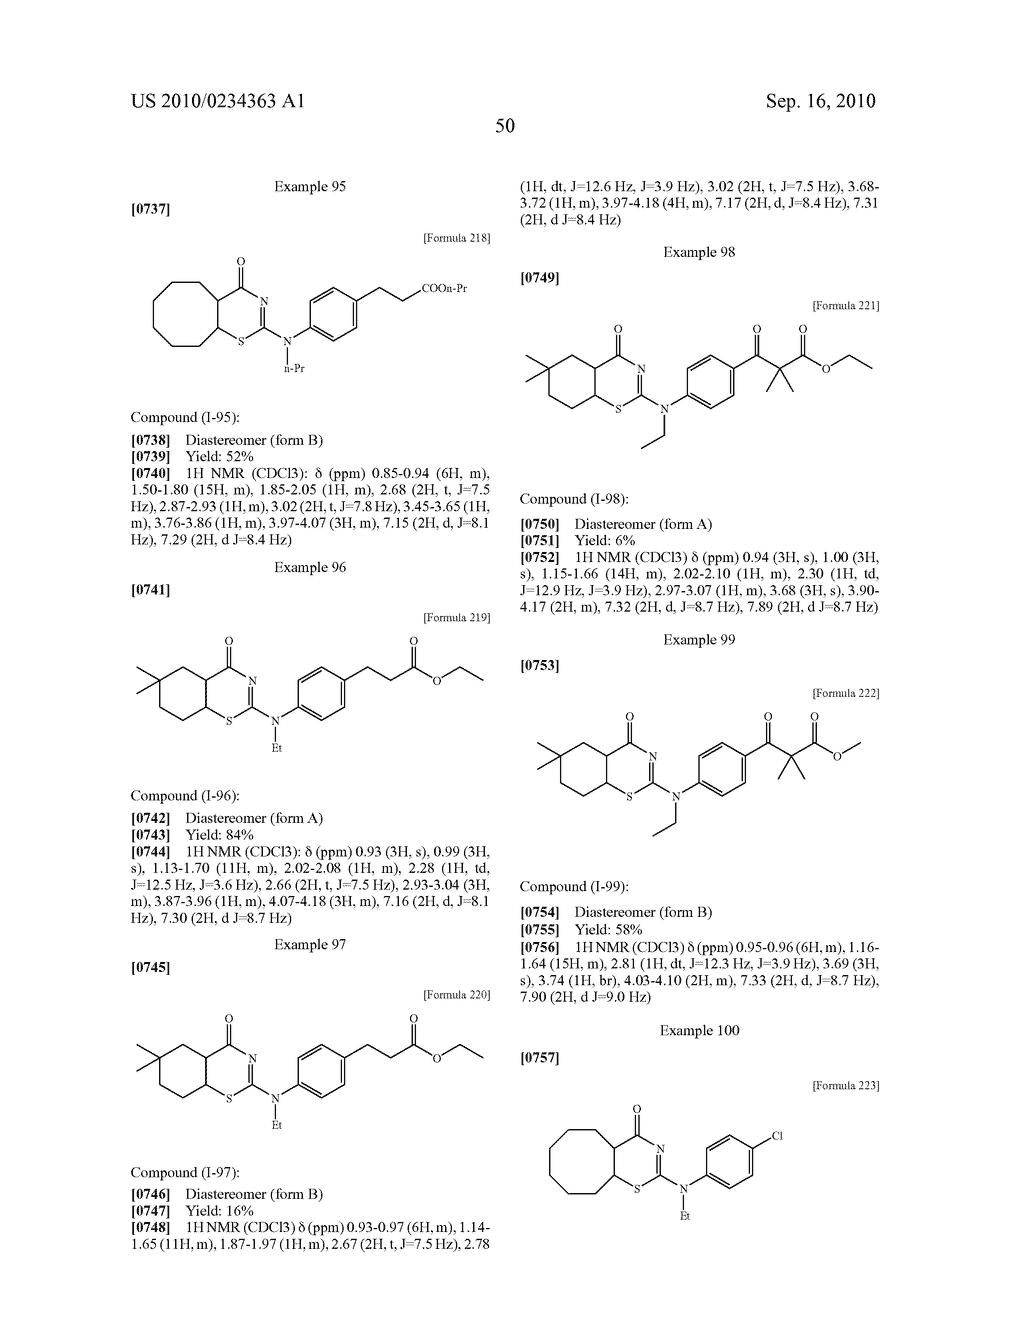 HETEROCYCLIC DERIVATIVE HAVING INHIBITORY ACTIVITY ON TYPE-I 11 DATA-HYDROXYSTEROID DEHYDROGENASE - diagram, schematic, and image 51